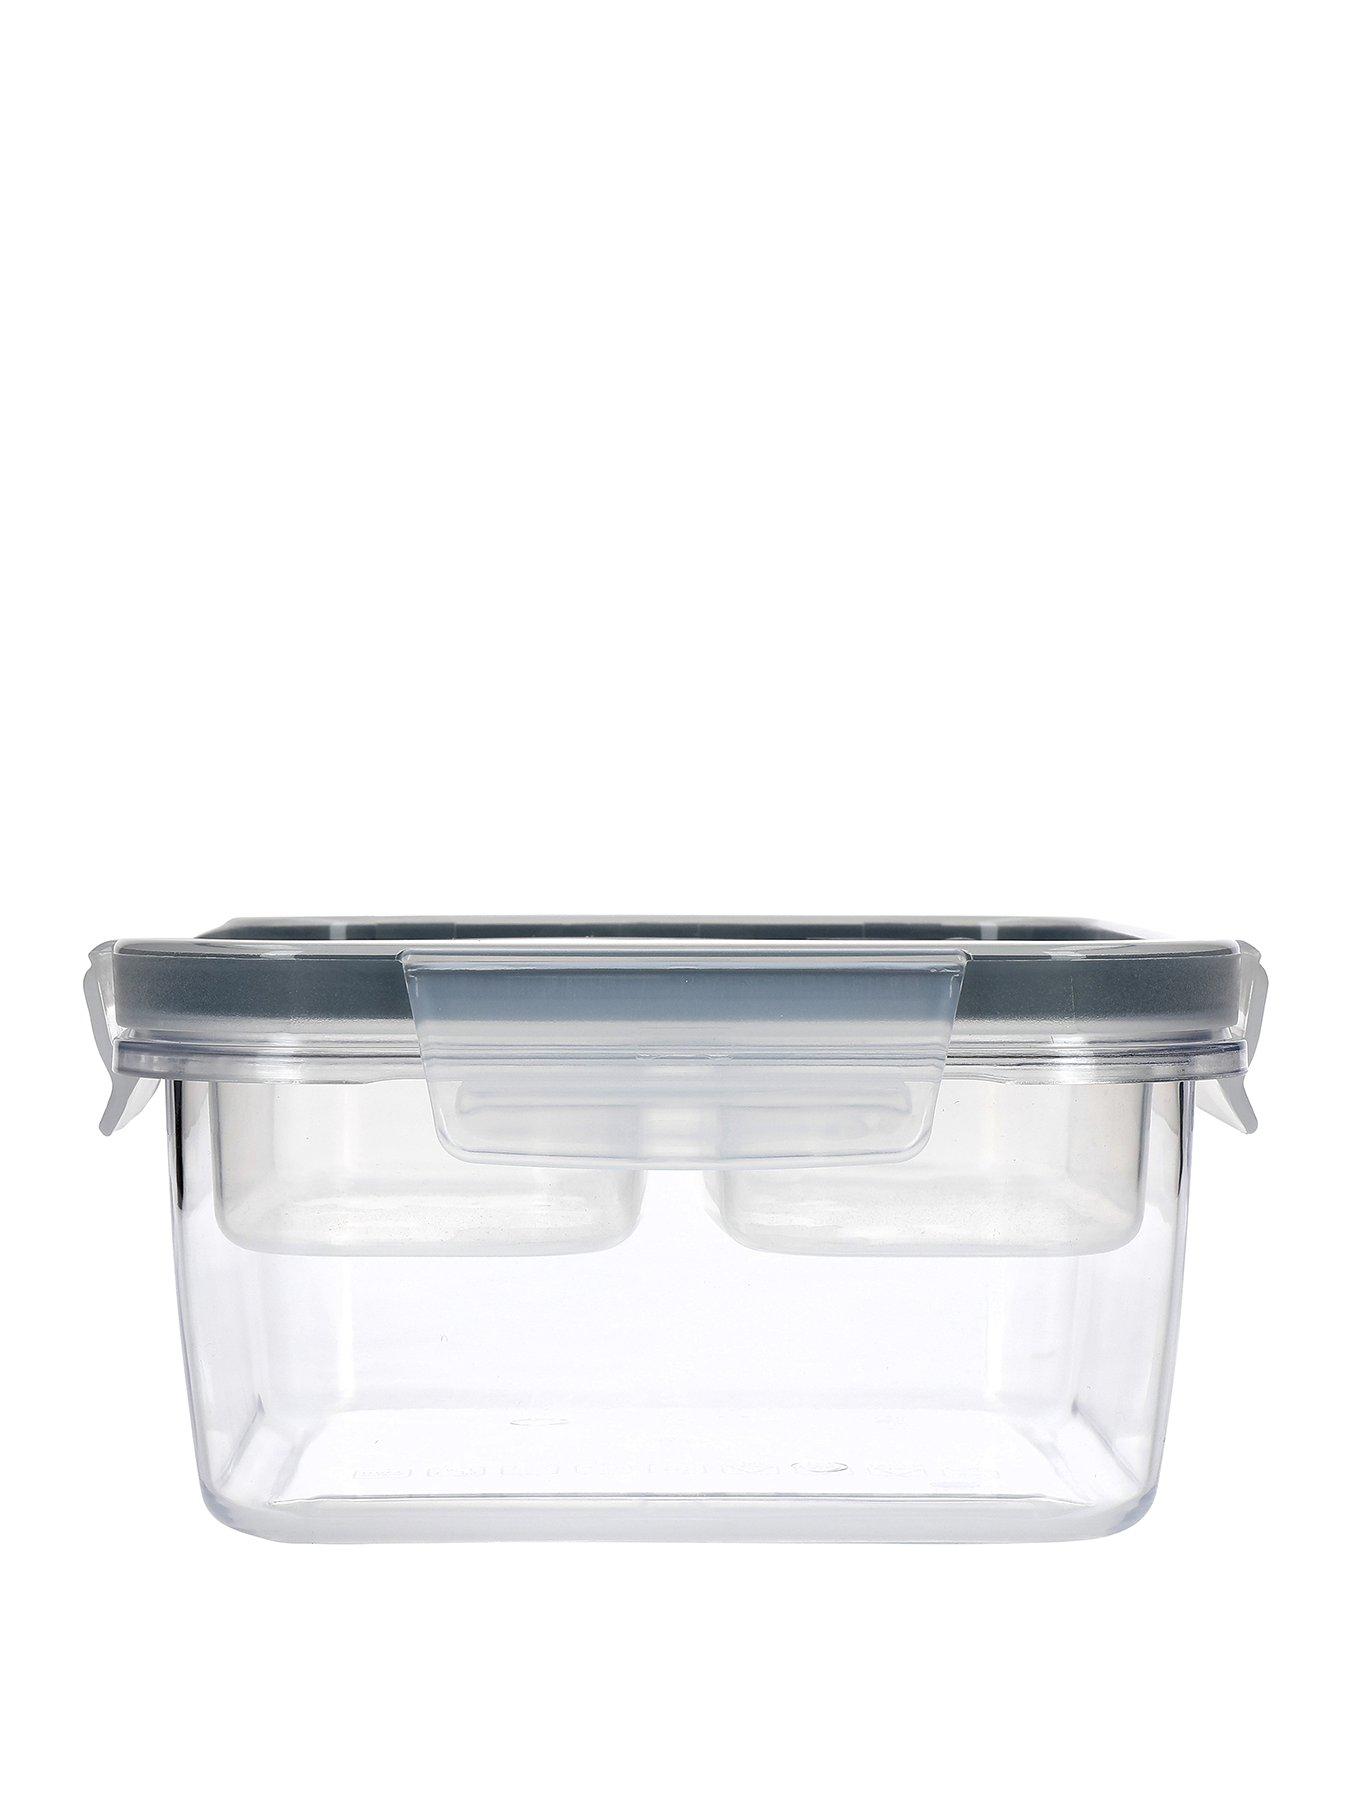 https://media.very.co.uk/i/very/V7NF9_SQ1_0000000647_CLEAR_SLf/masterclass-snap-food-storage-container.jpg?$180x240_retinamobilex2$&$roundel_very$&p1_img=sale_2017